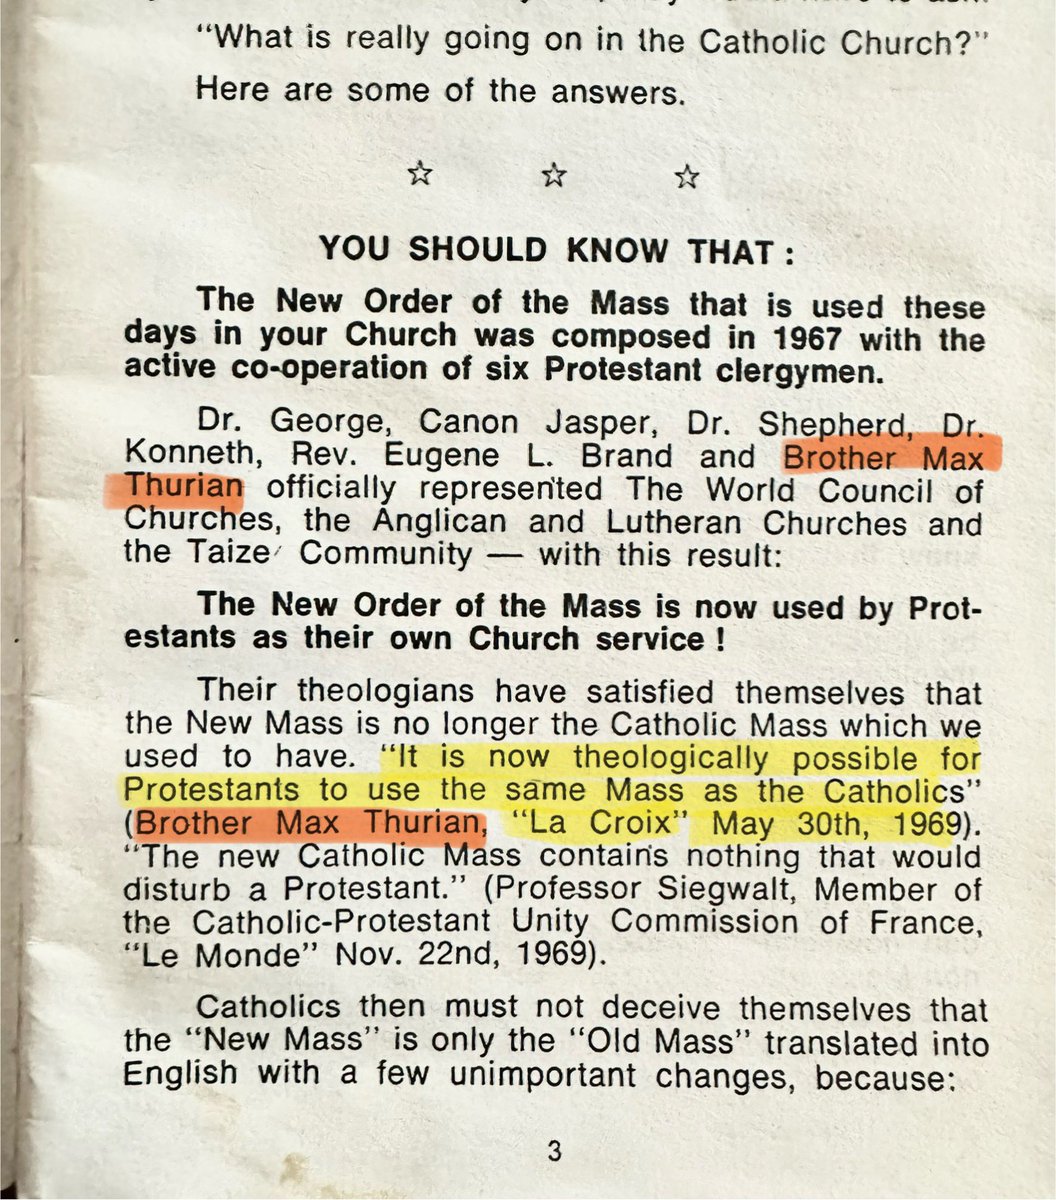 Daily reminder that the Novus Ordo liturgy is a Protestant abomination invented in the 1960s.